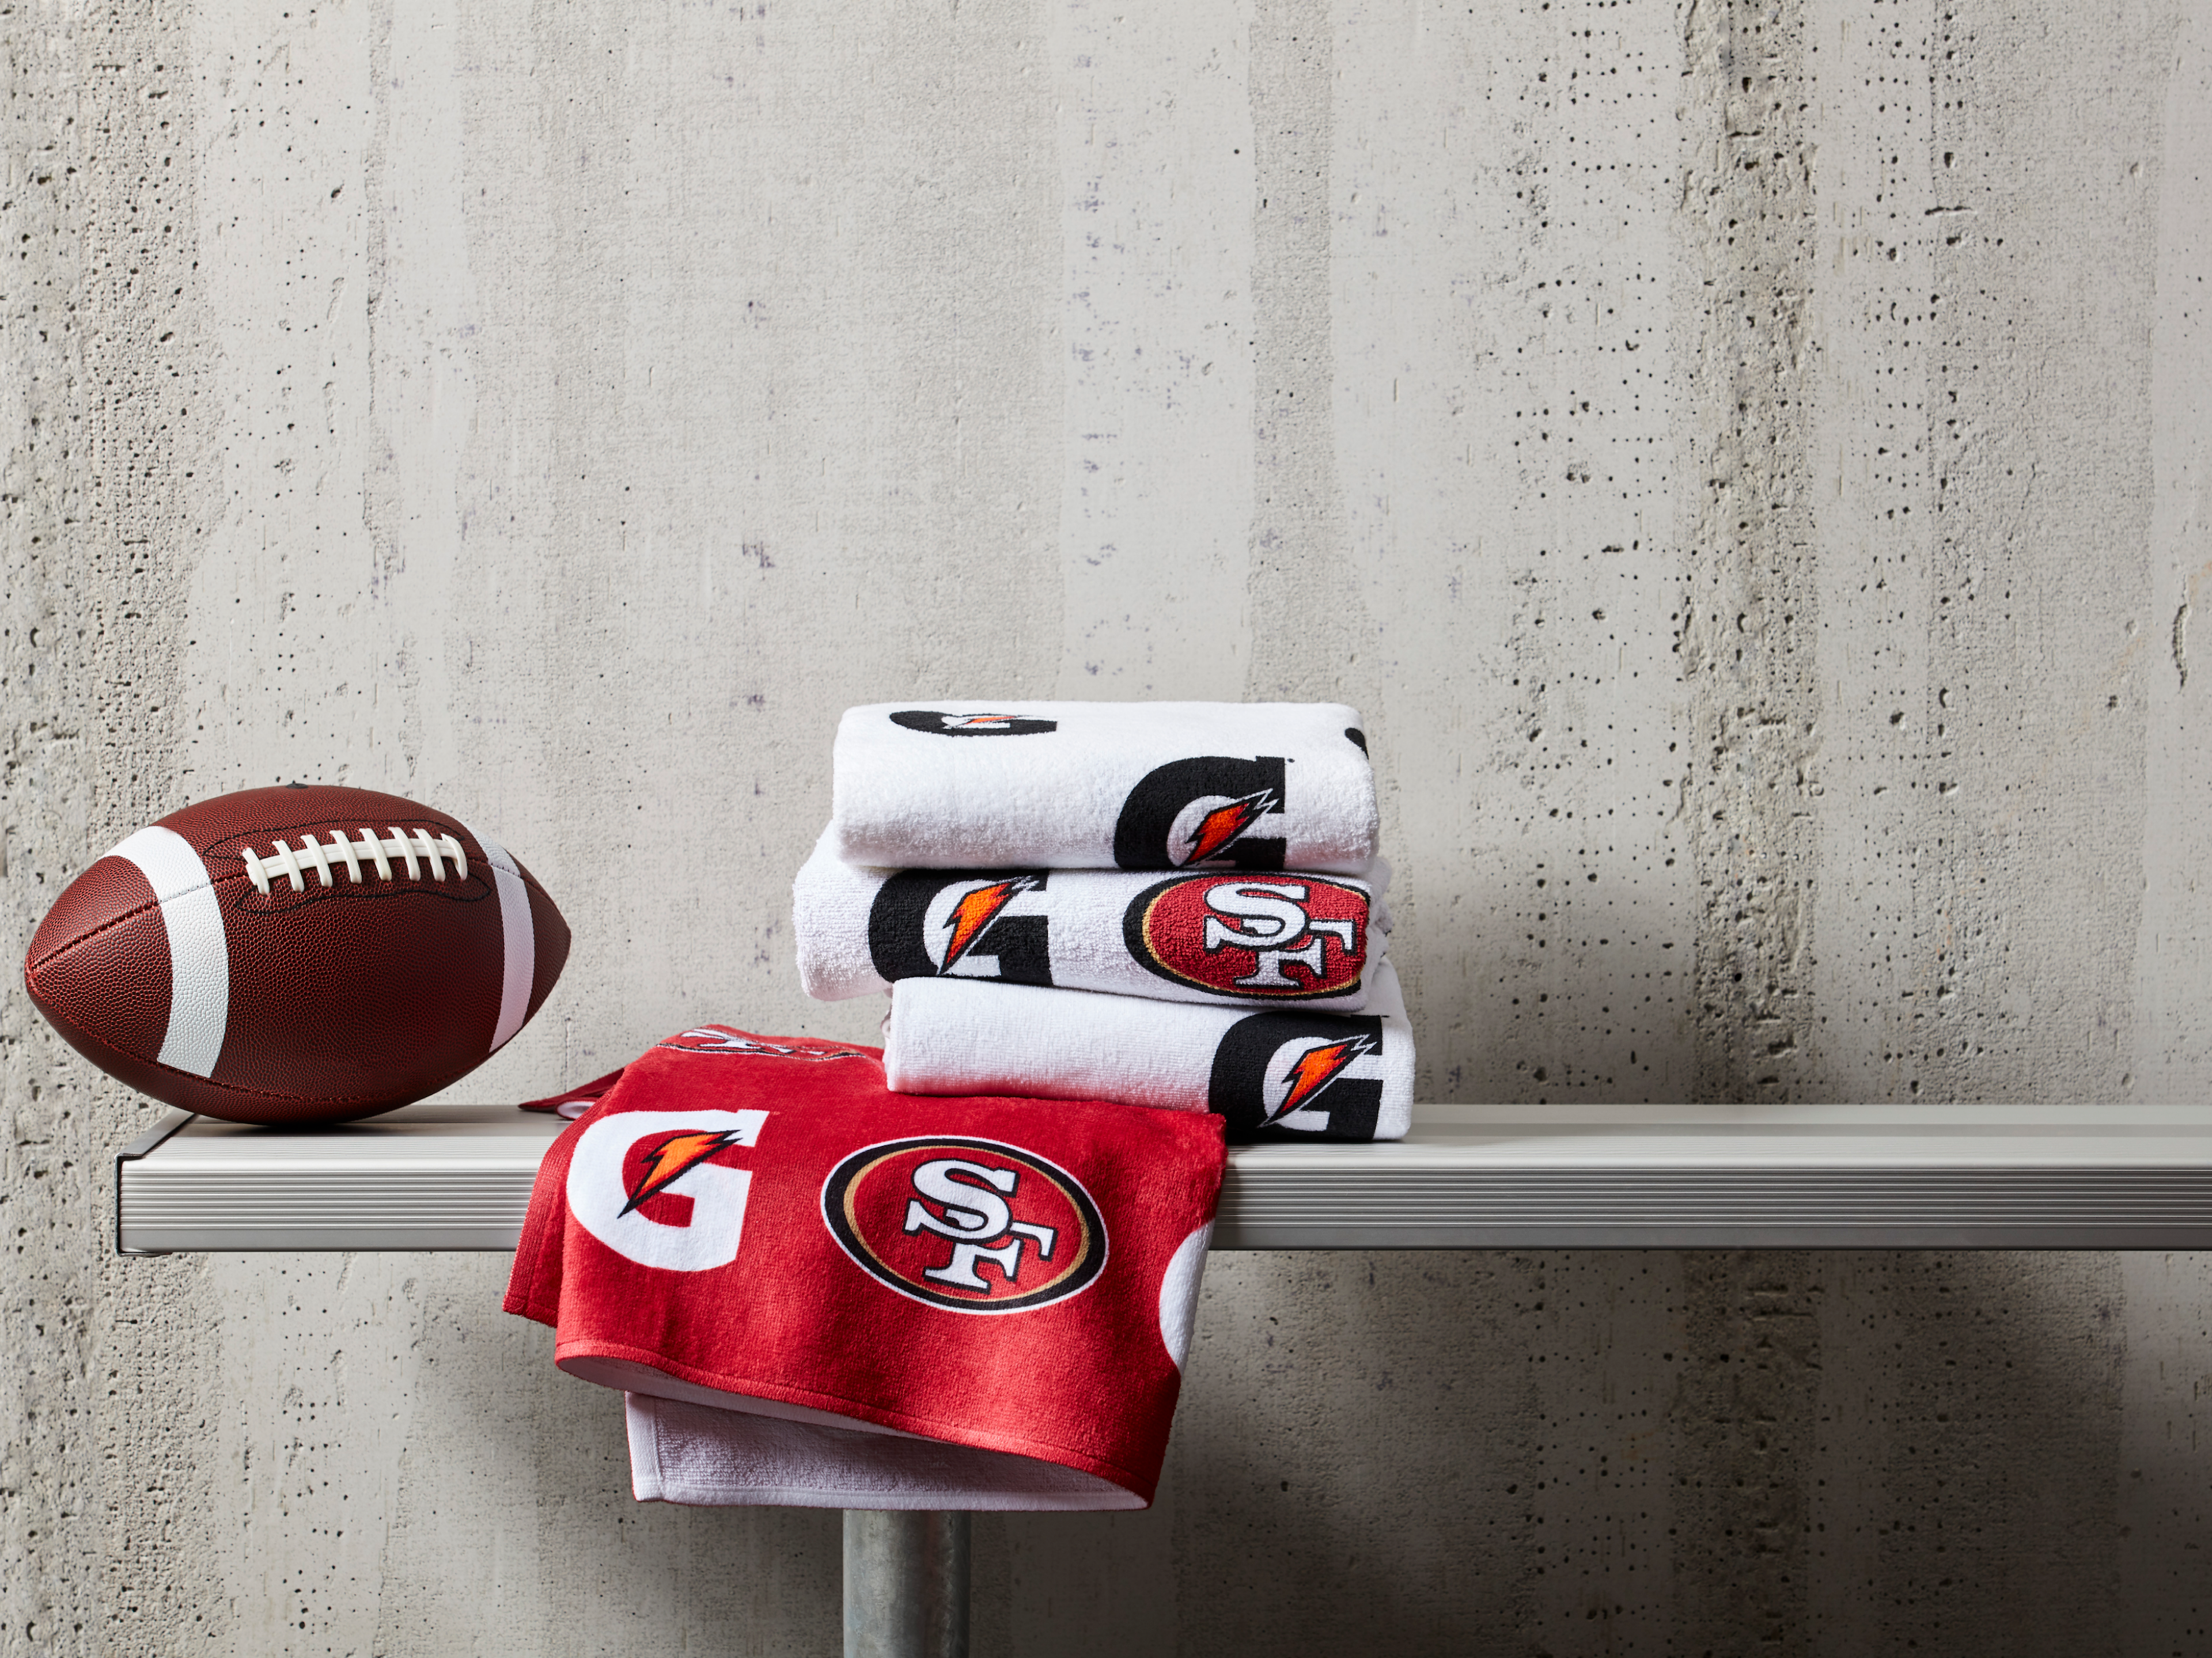 San Francisco 49ers Pro Towel on a Bench